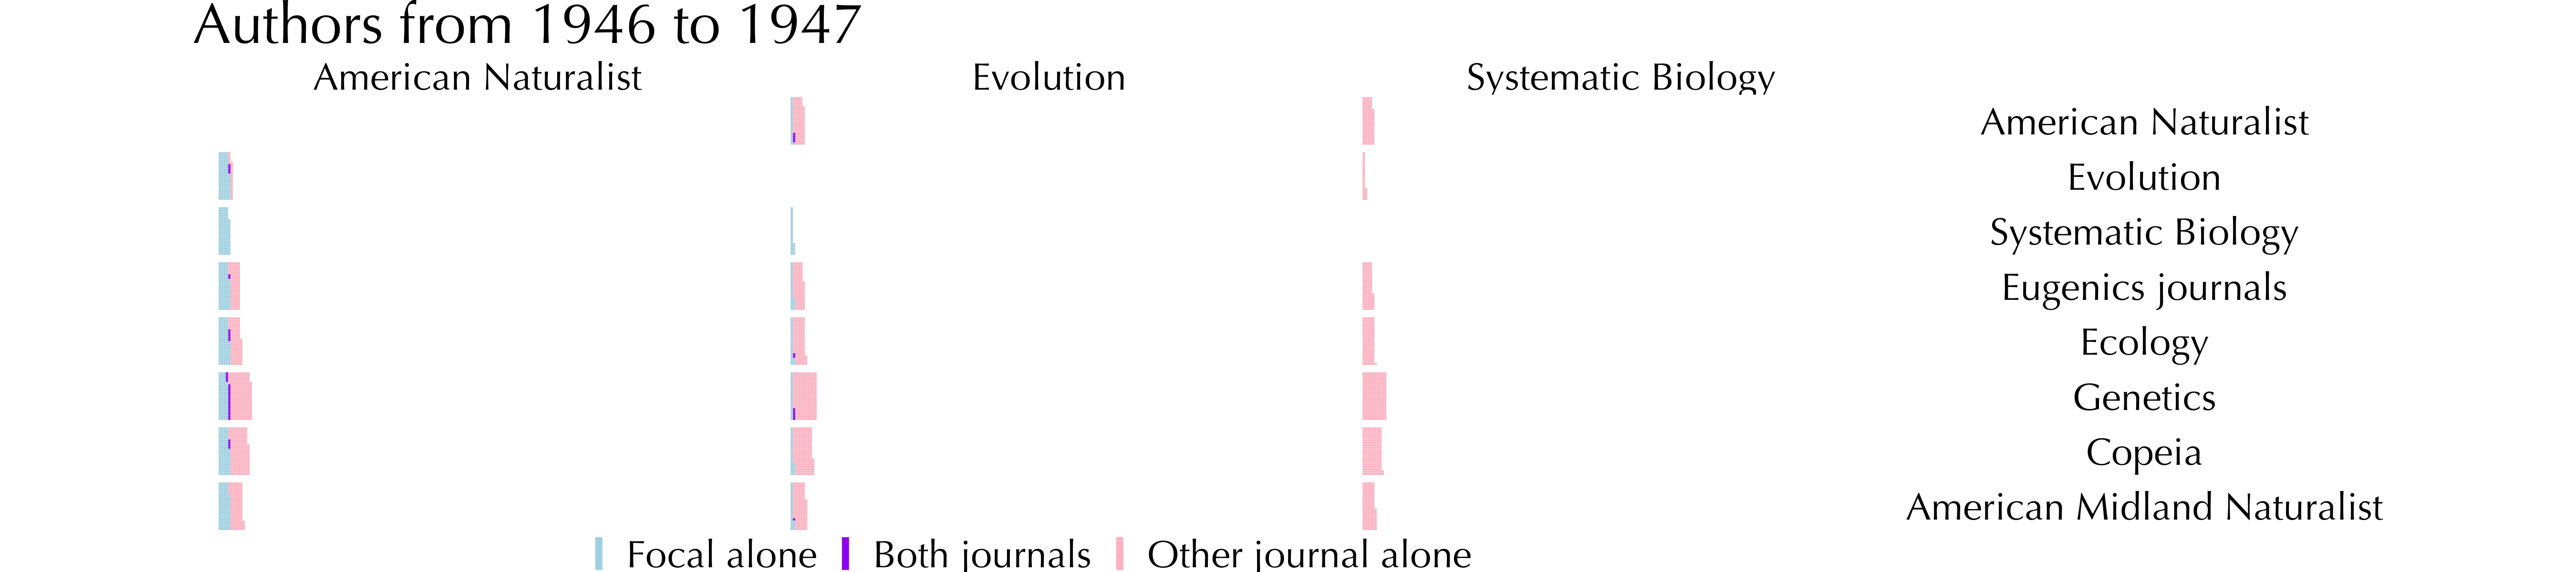 Authors publishing in both journals